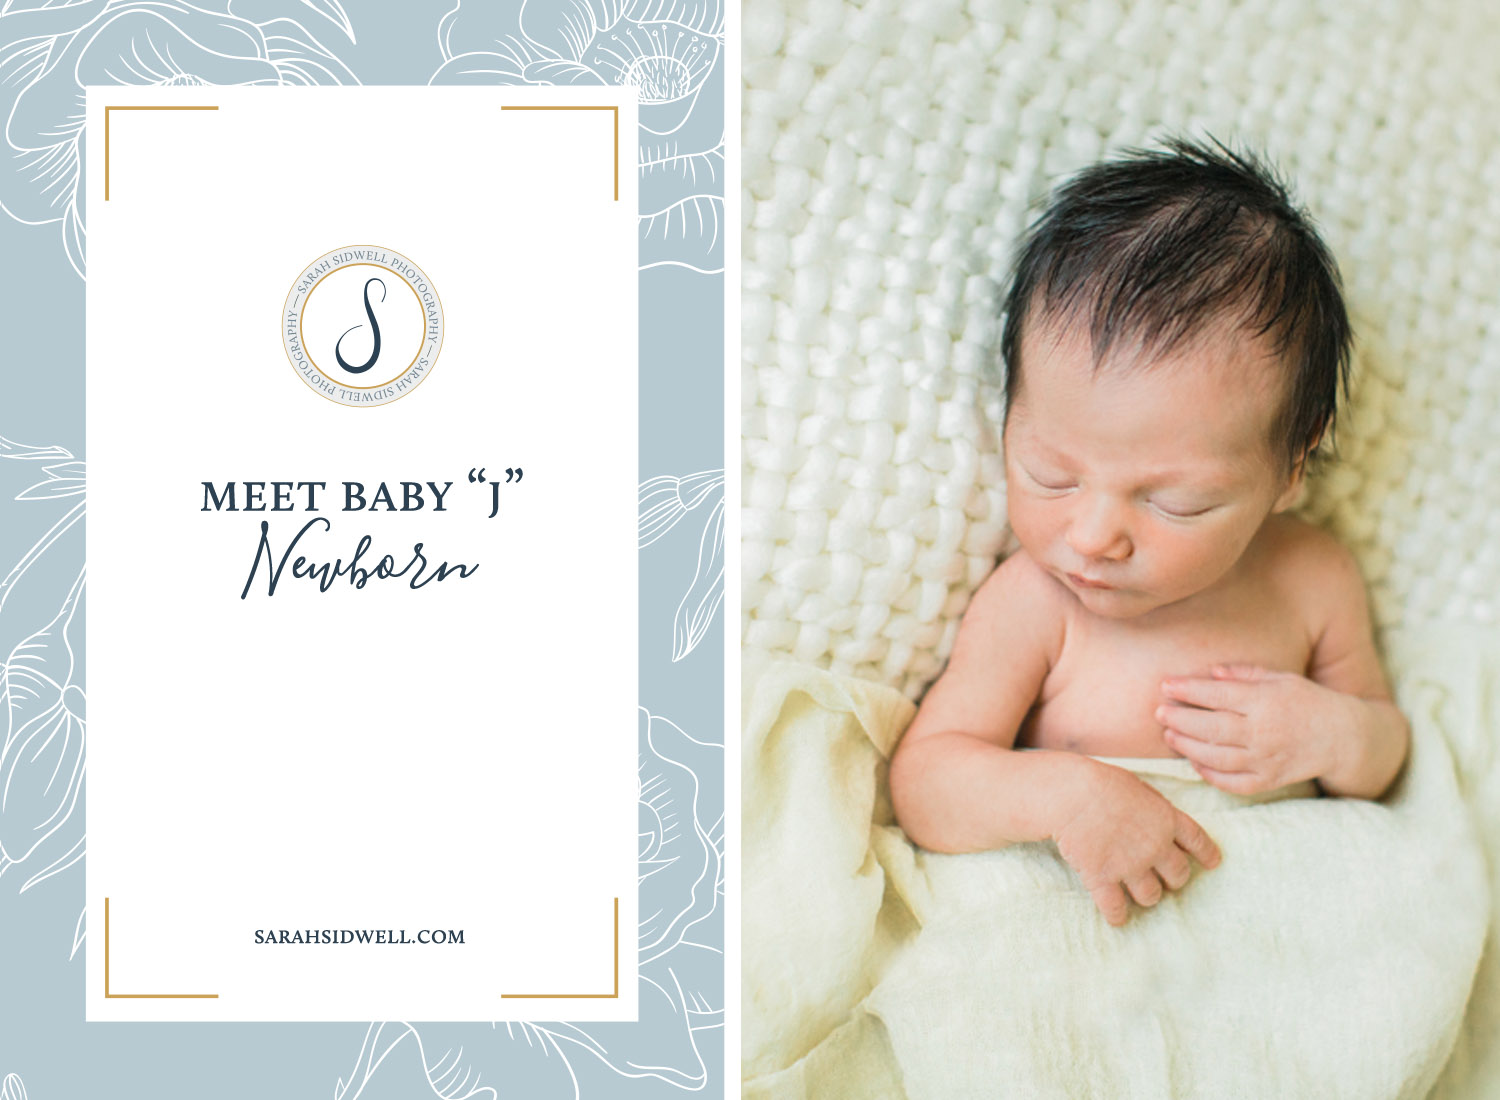 nashville newborn photographer takes baby boy's first portrait photo session in new parent's nashville home while offering baby portraits in studio as well.jpg